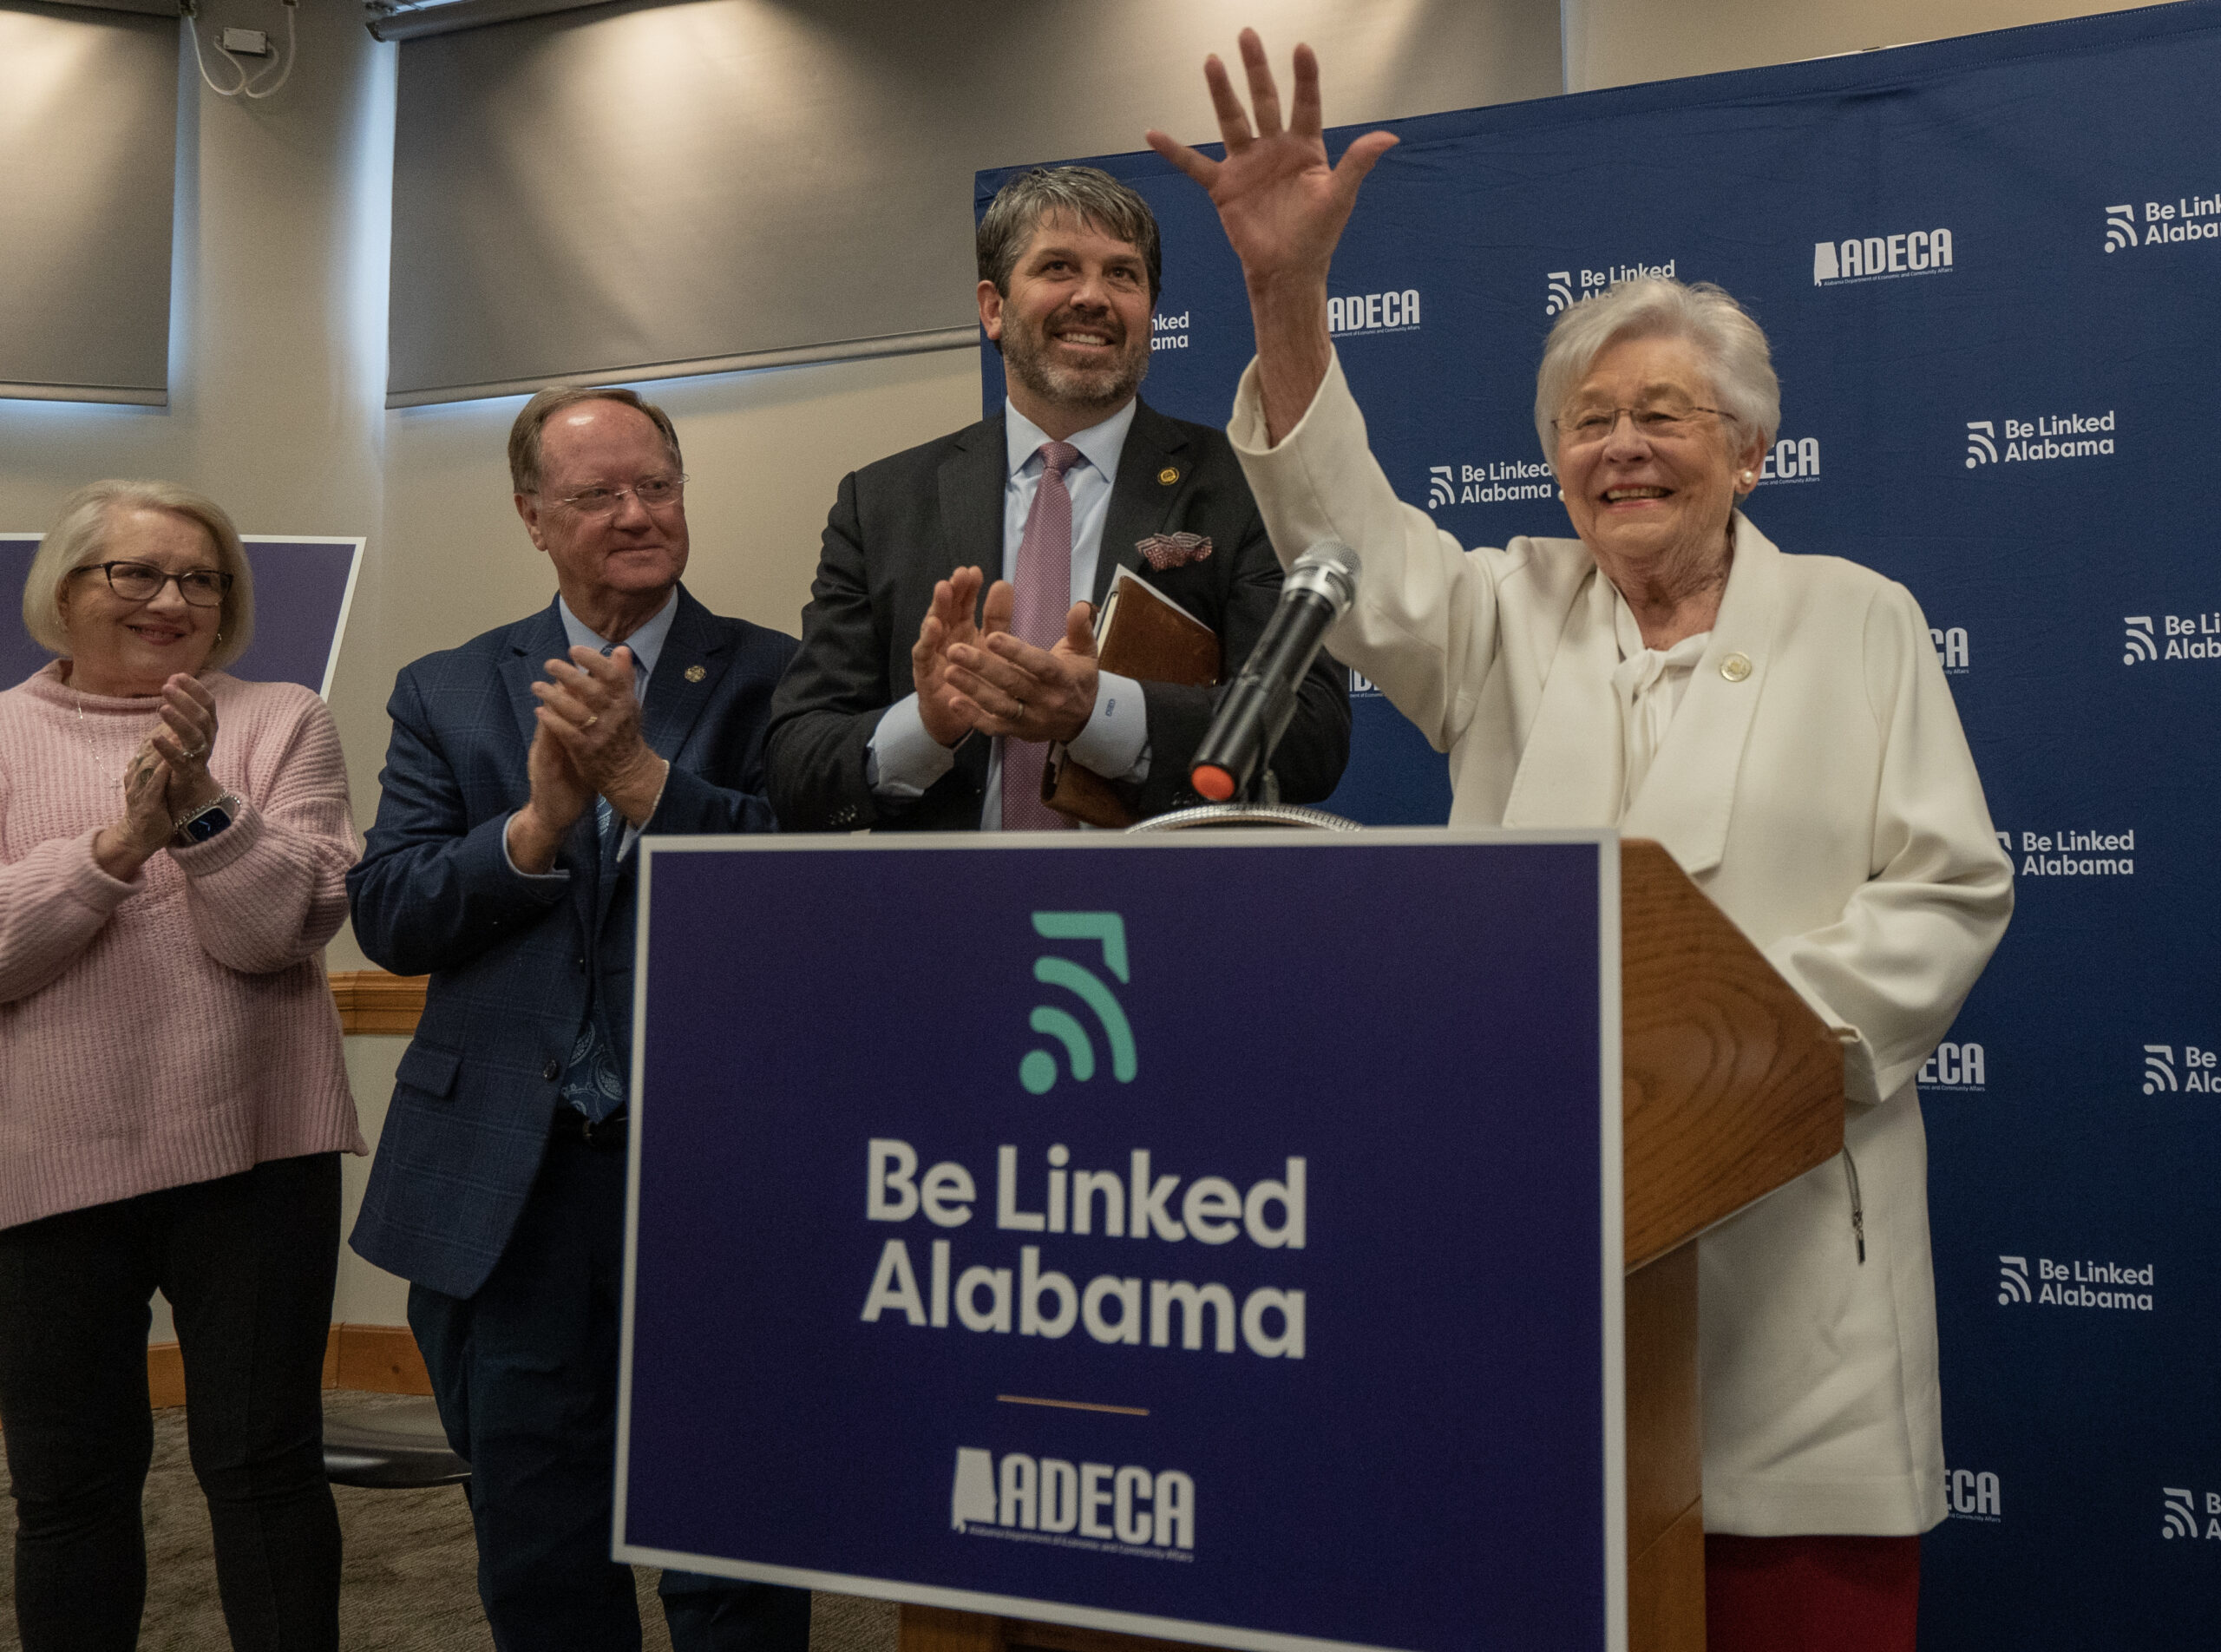 Governor Ivey Makes Second Stop on Broadband Tour, Breaks Ground Signaling Digital Infrastructure Progress